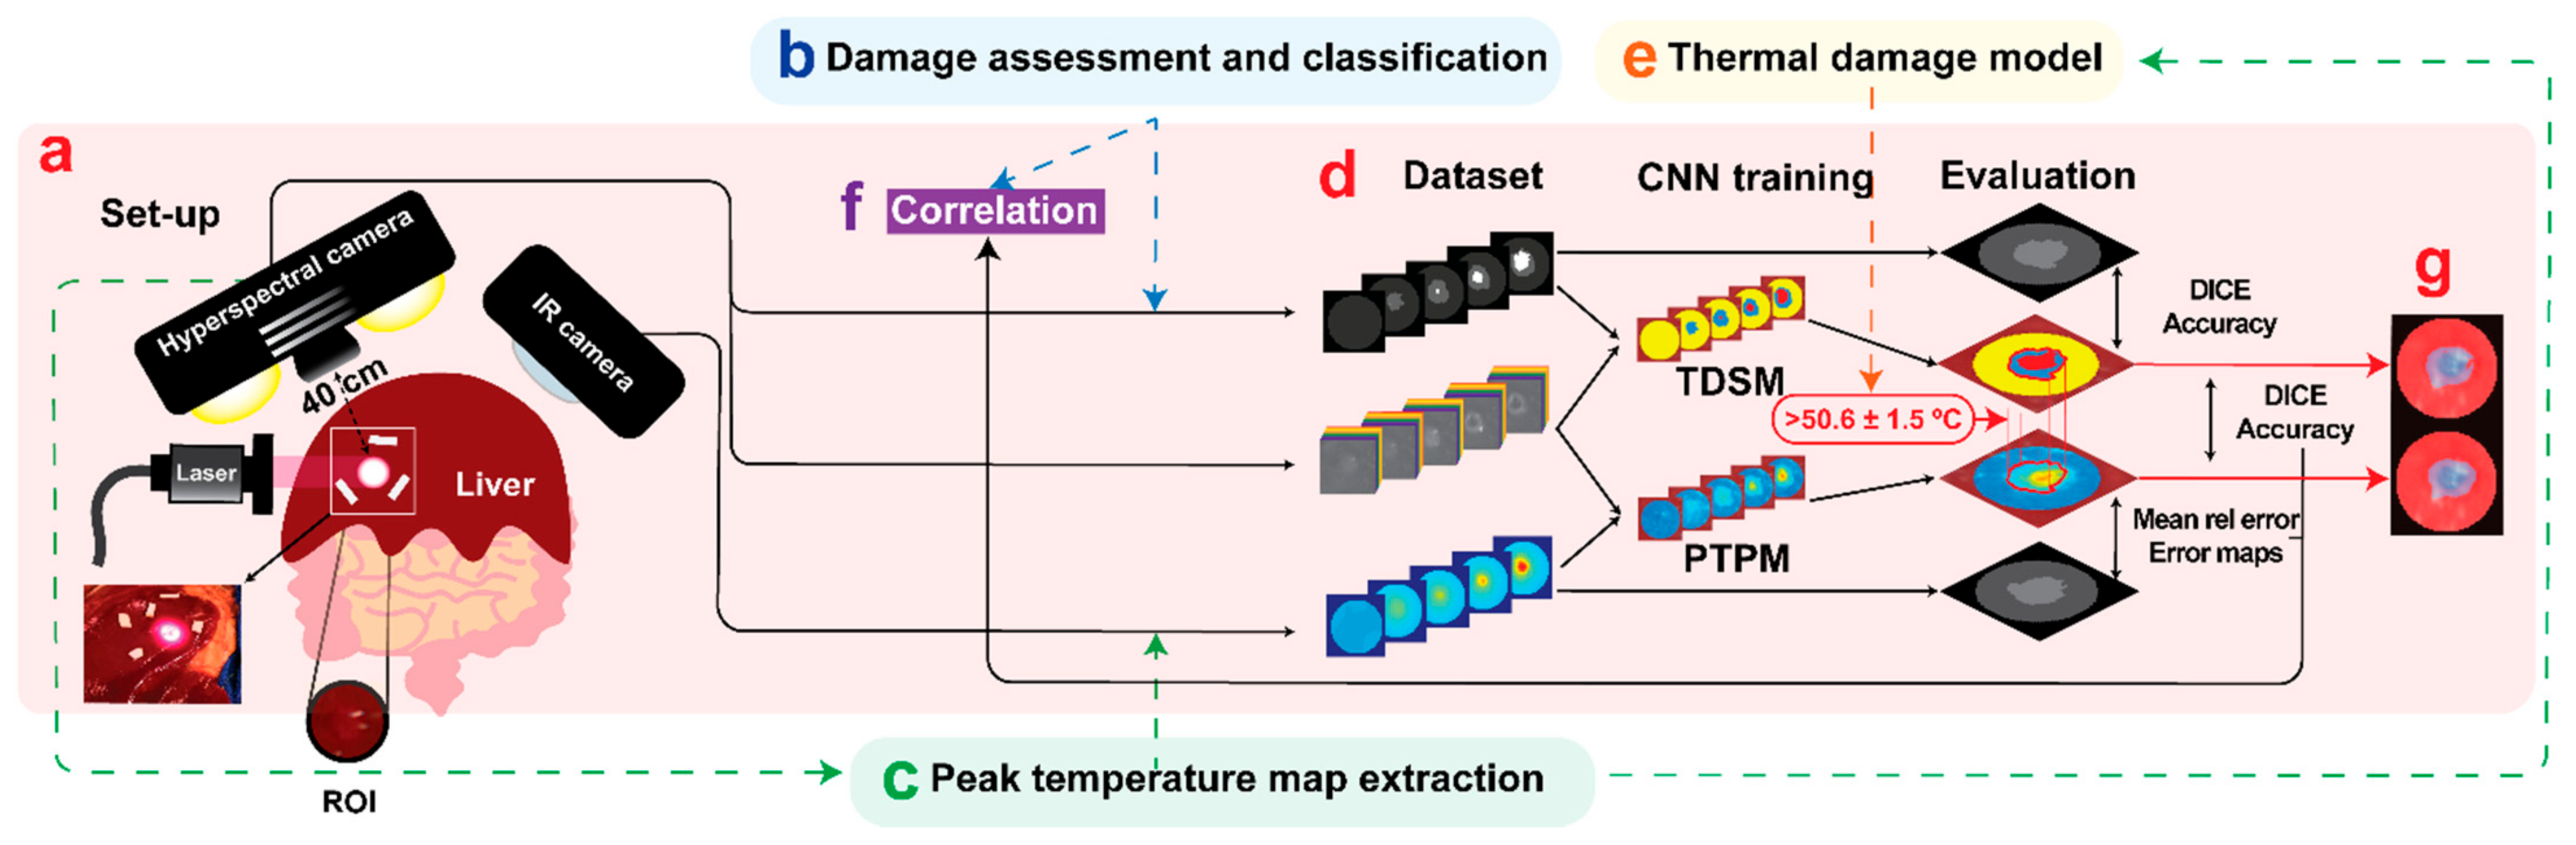 Sensors | Free Full-Text | Prediction of In Vivo Laser-Induced Thermal  Damage with Hyperspectral Imaging Using Deep Learning